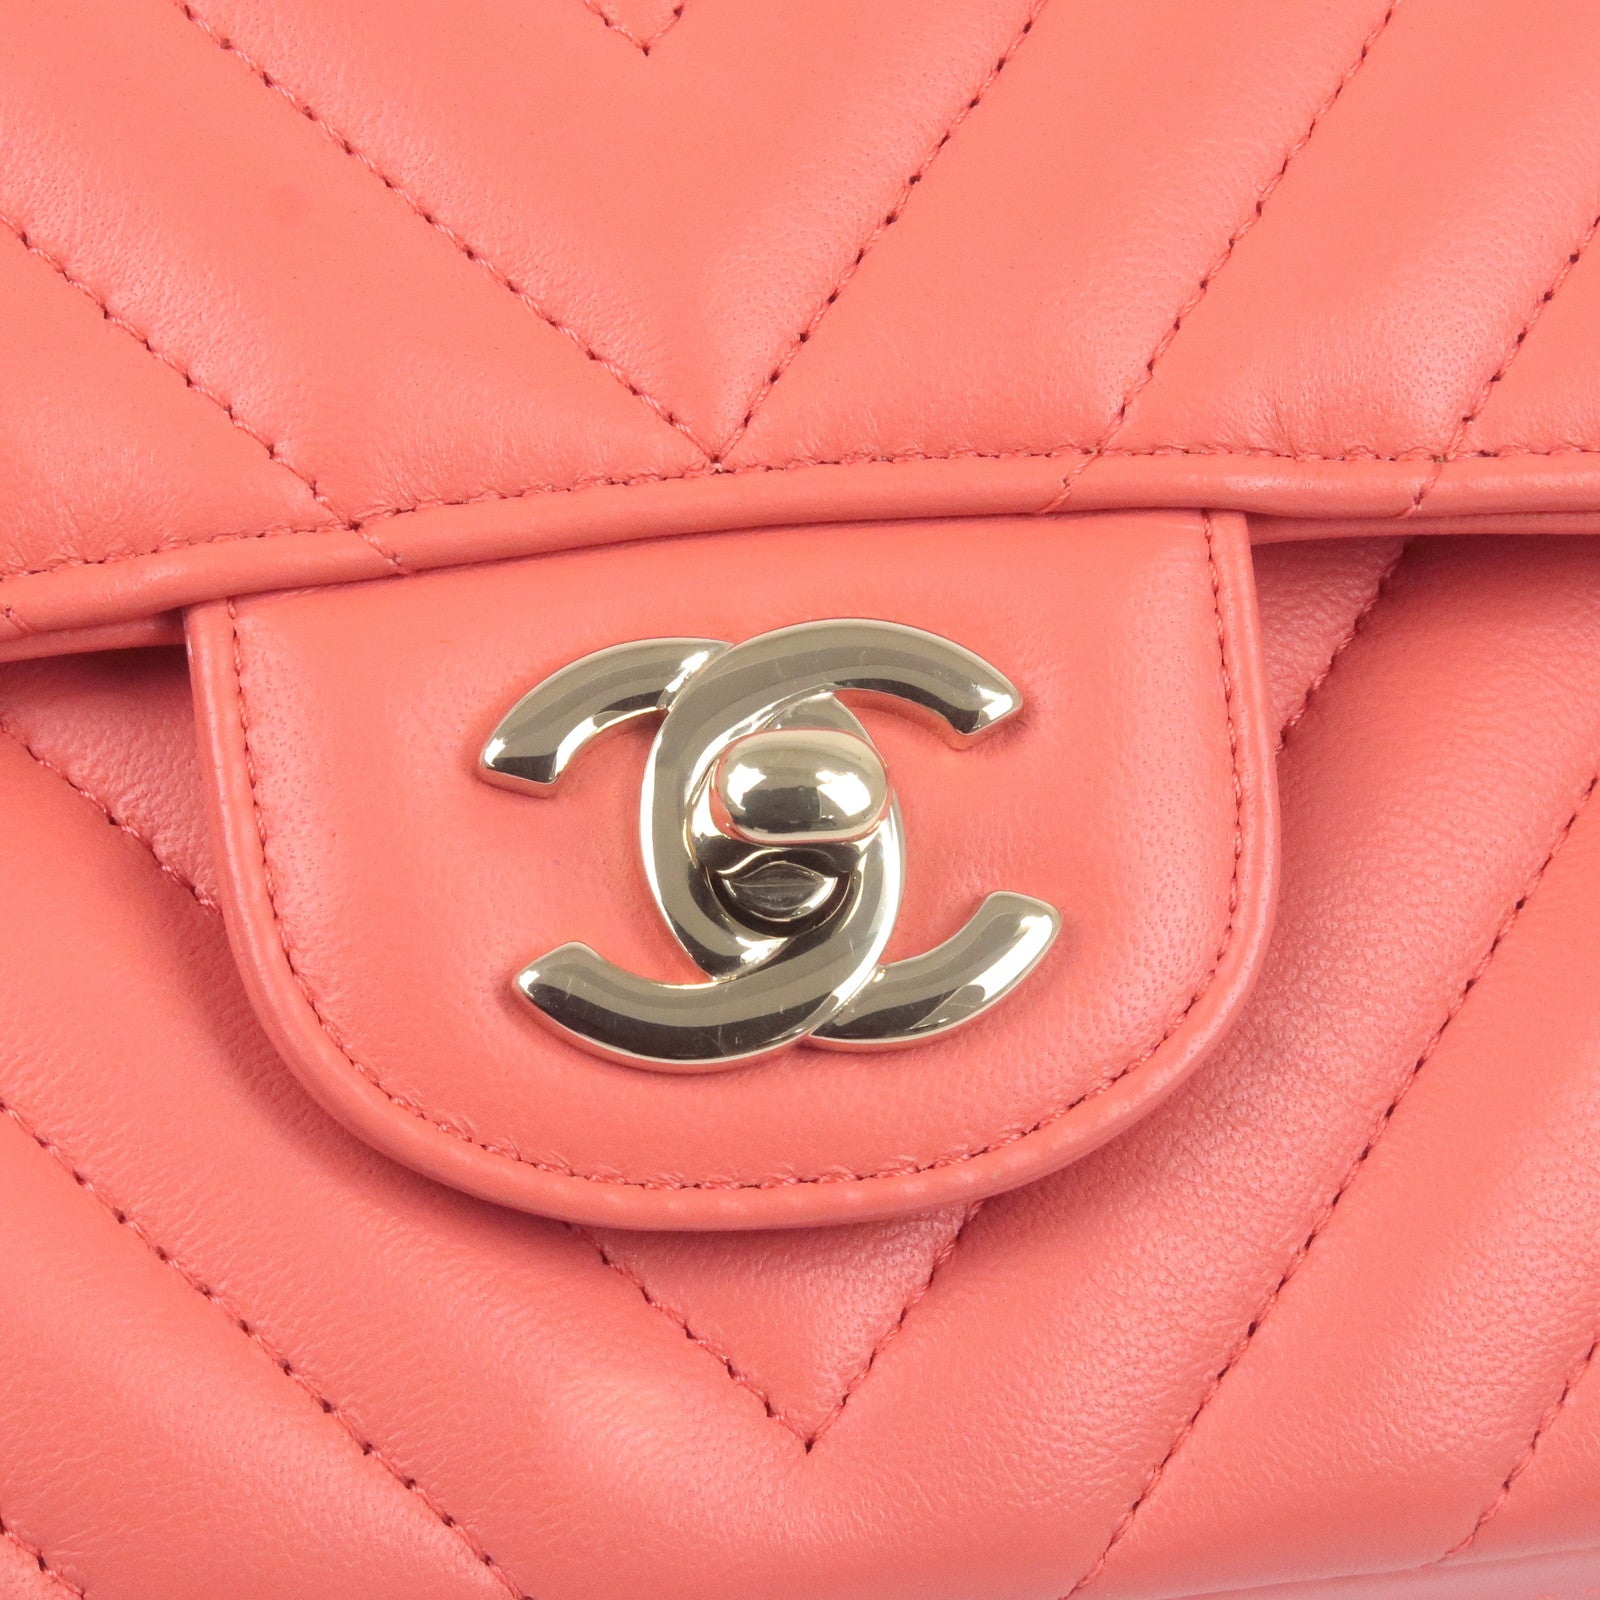 The Colours of Chanel: From Classic to Seasonal